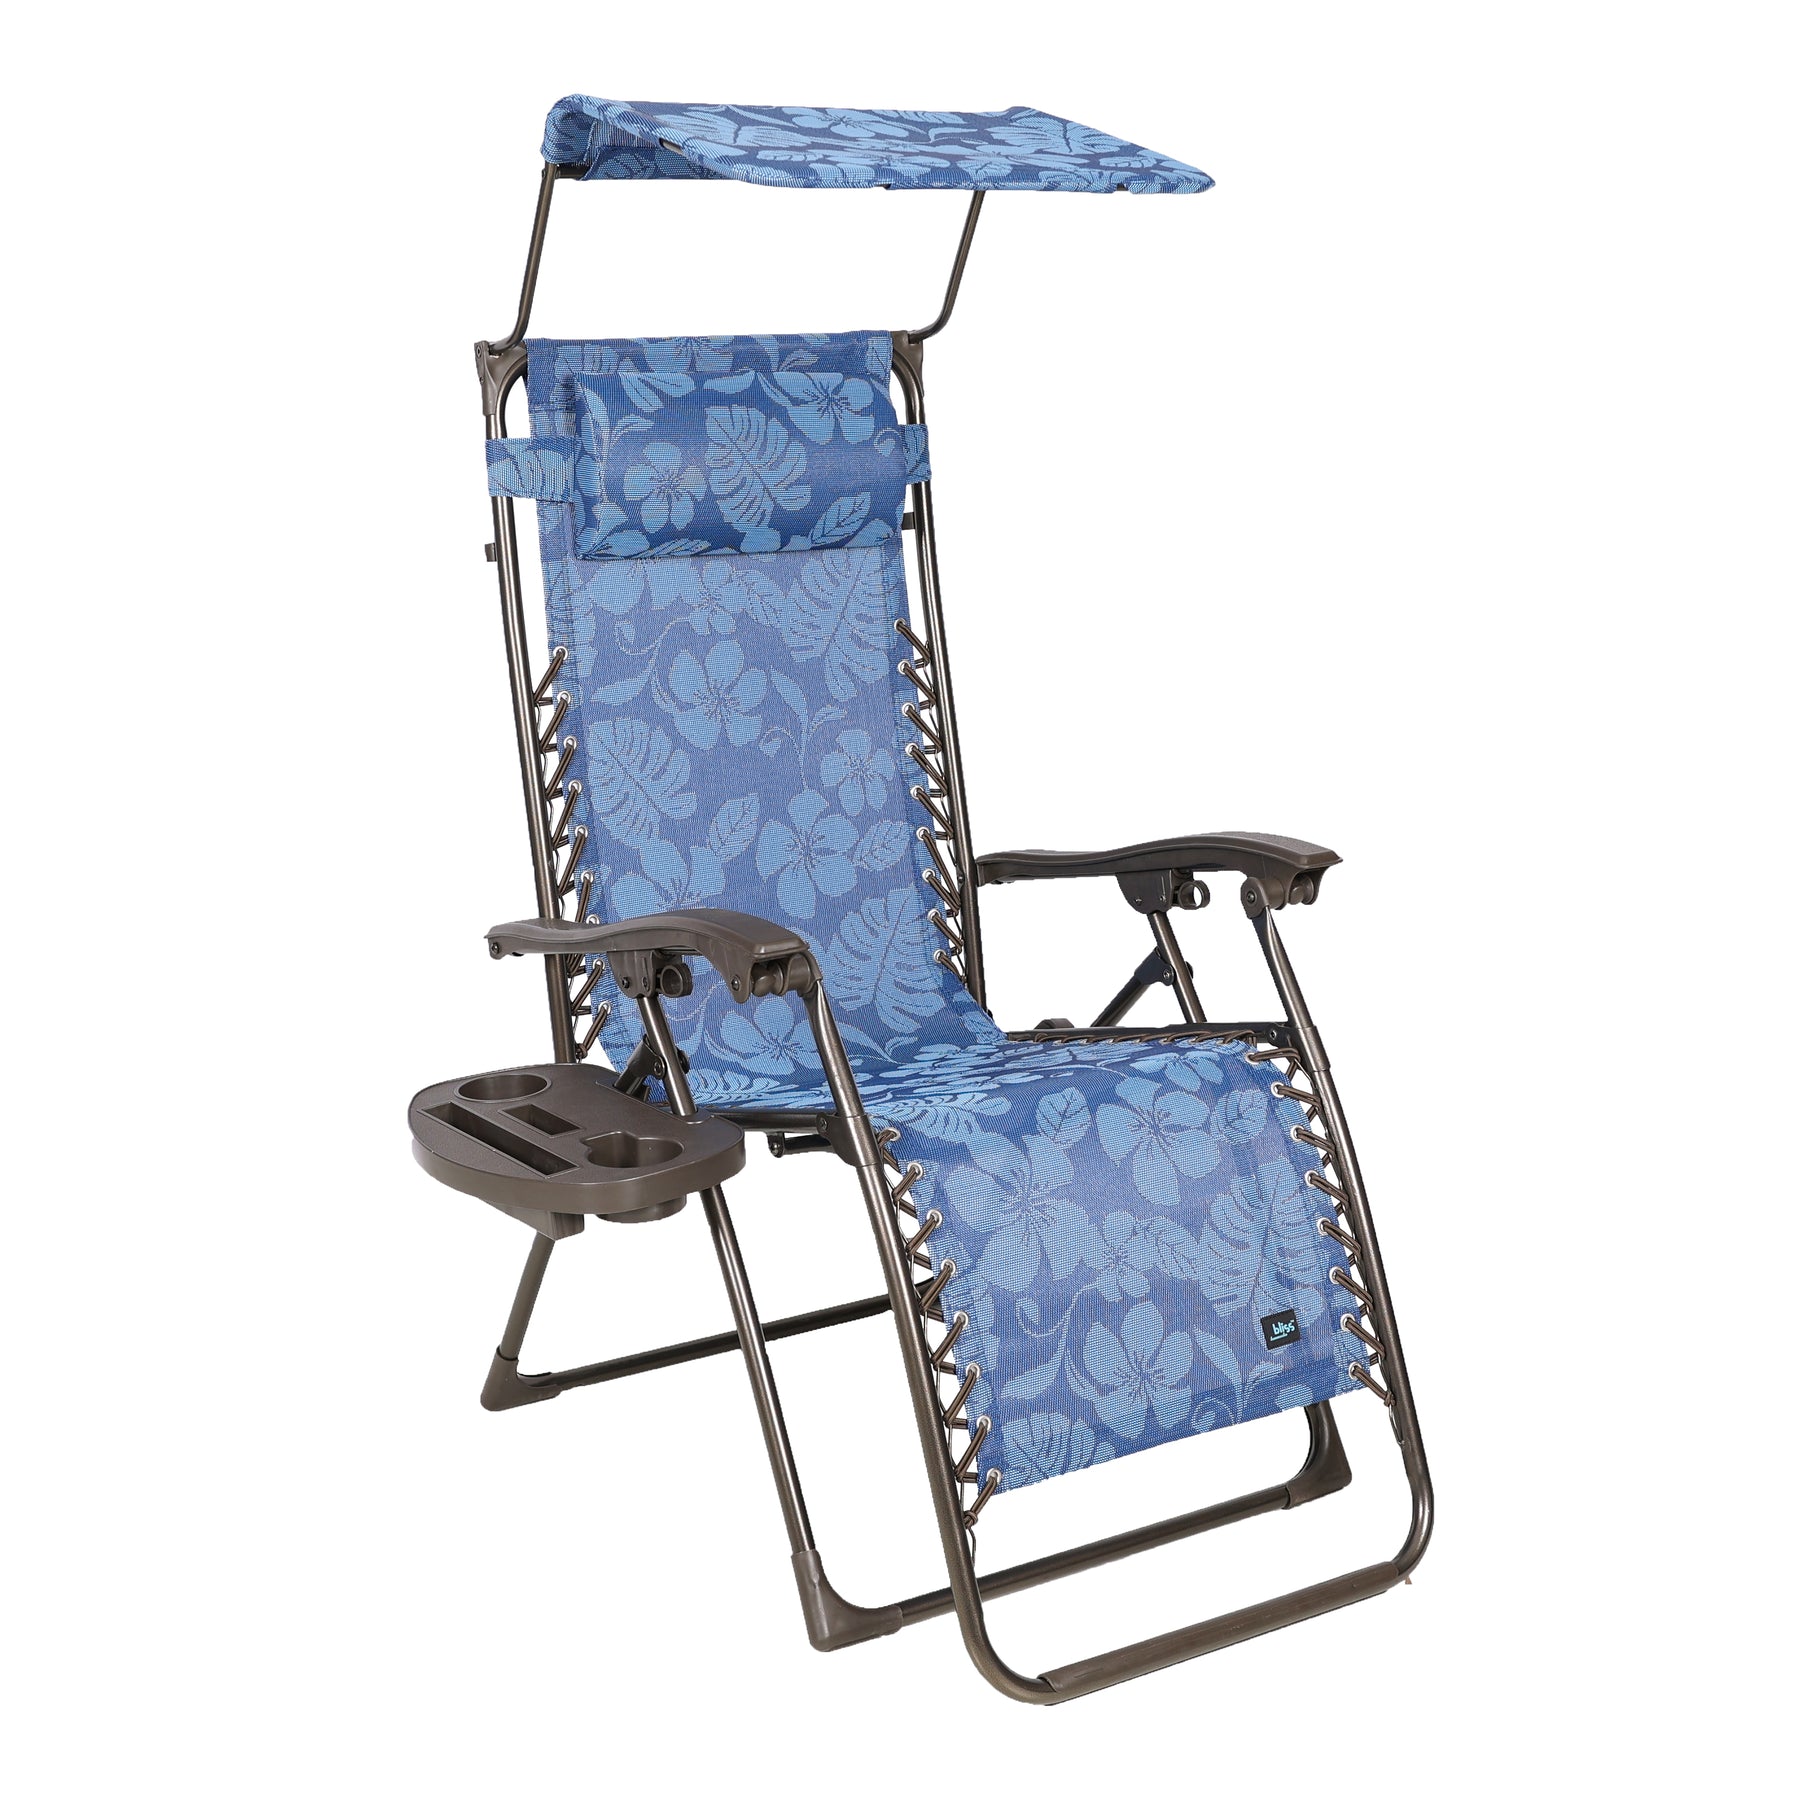 Angled view of a Bliss Hammocks 26-inch Gravity Free Chair with a canopy and drink tray in the blue flowers variation.